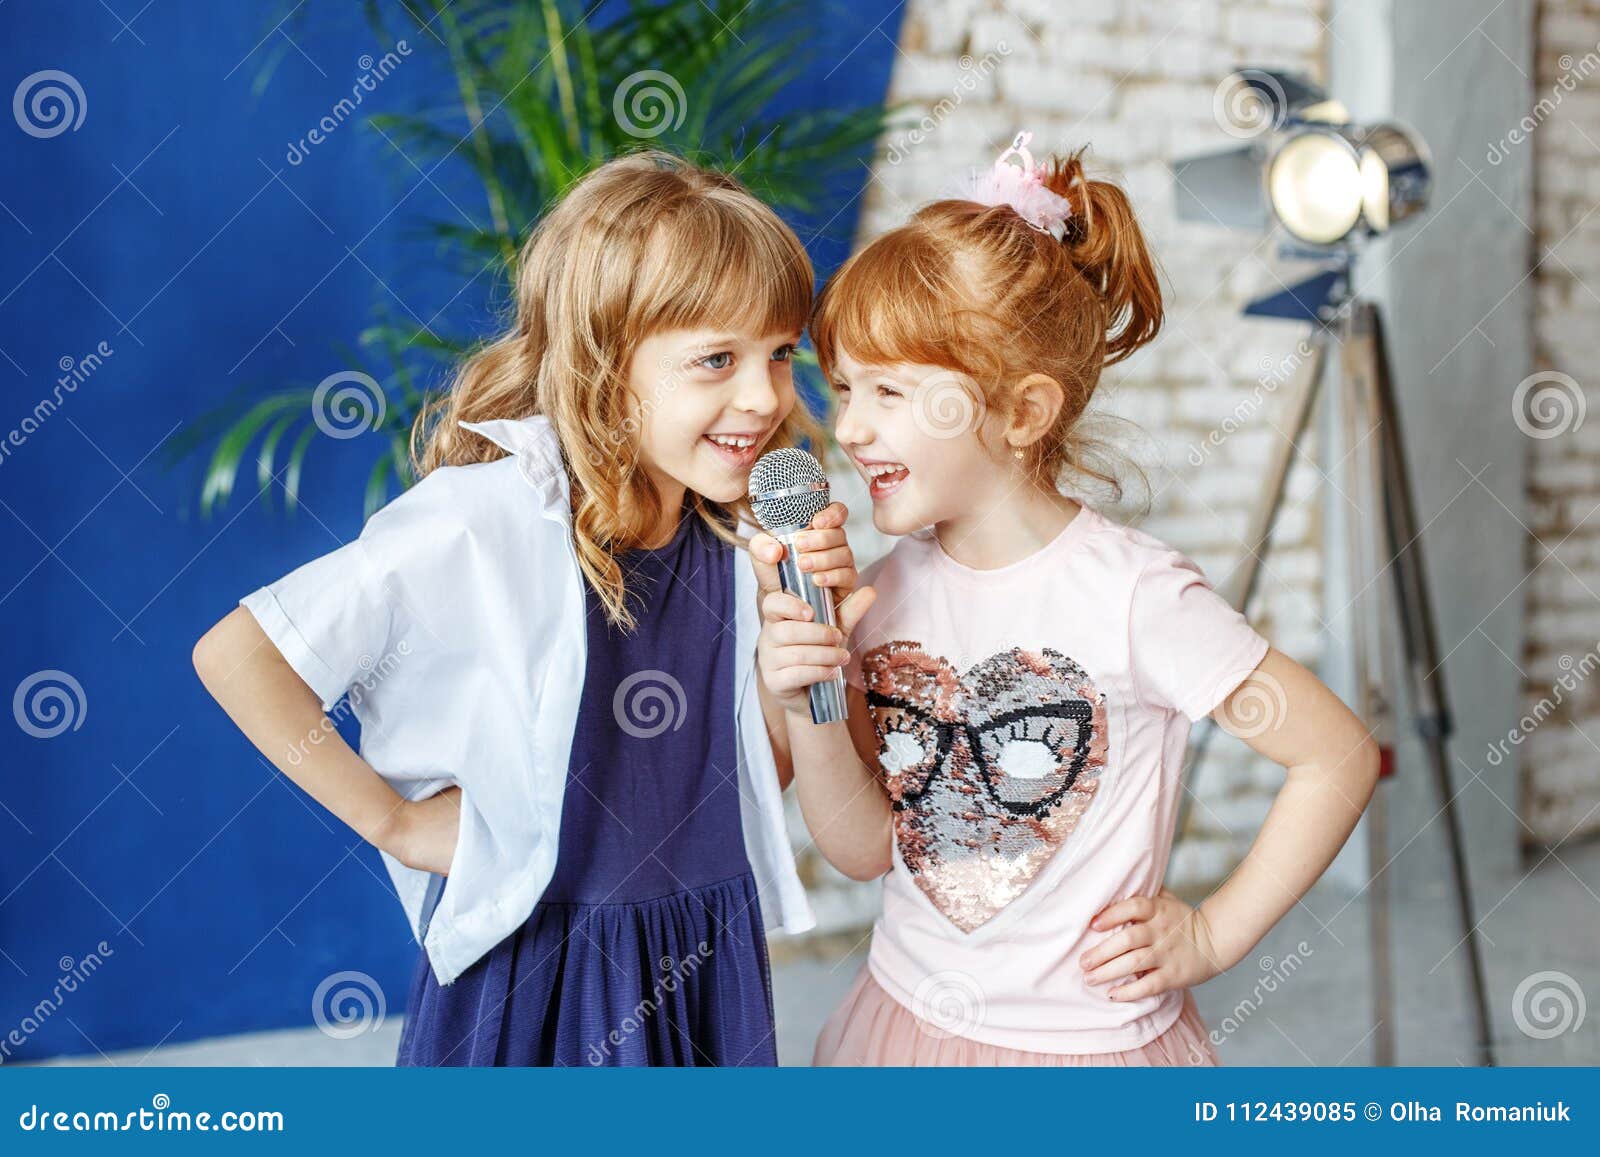 two funny children sing a song in karaoke. the concept is childh